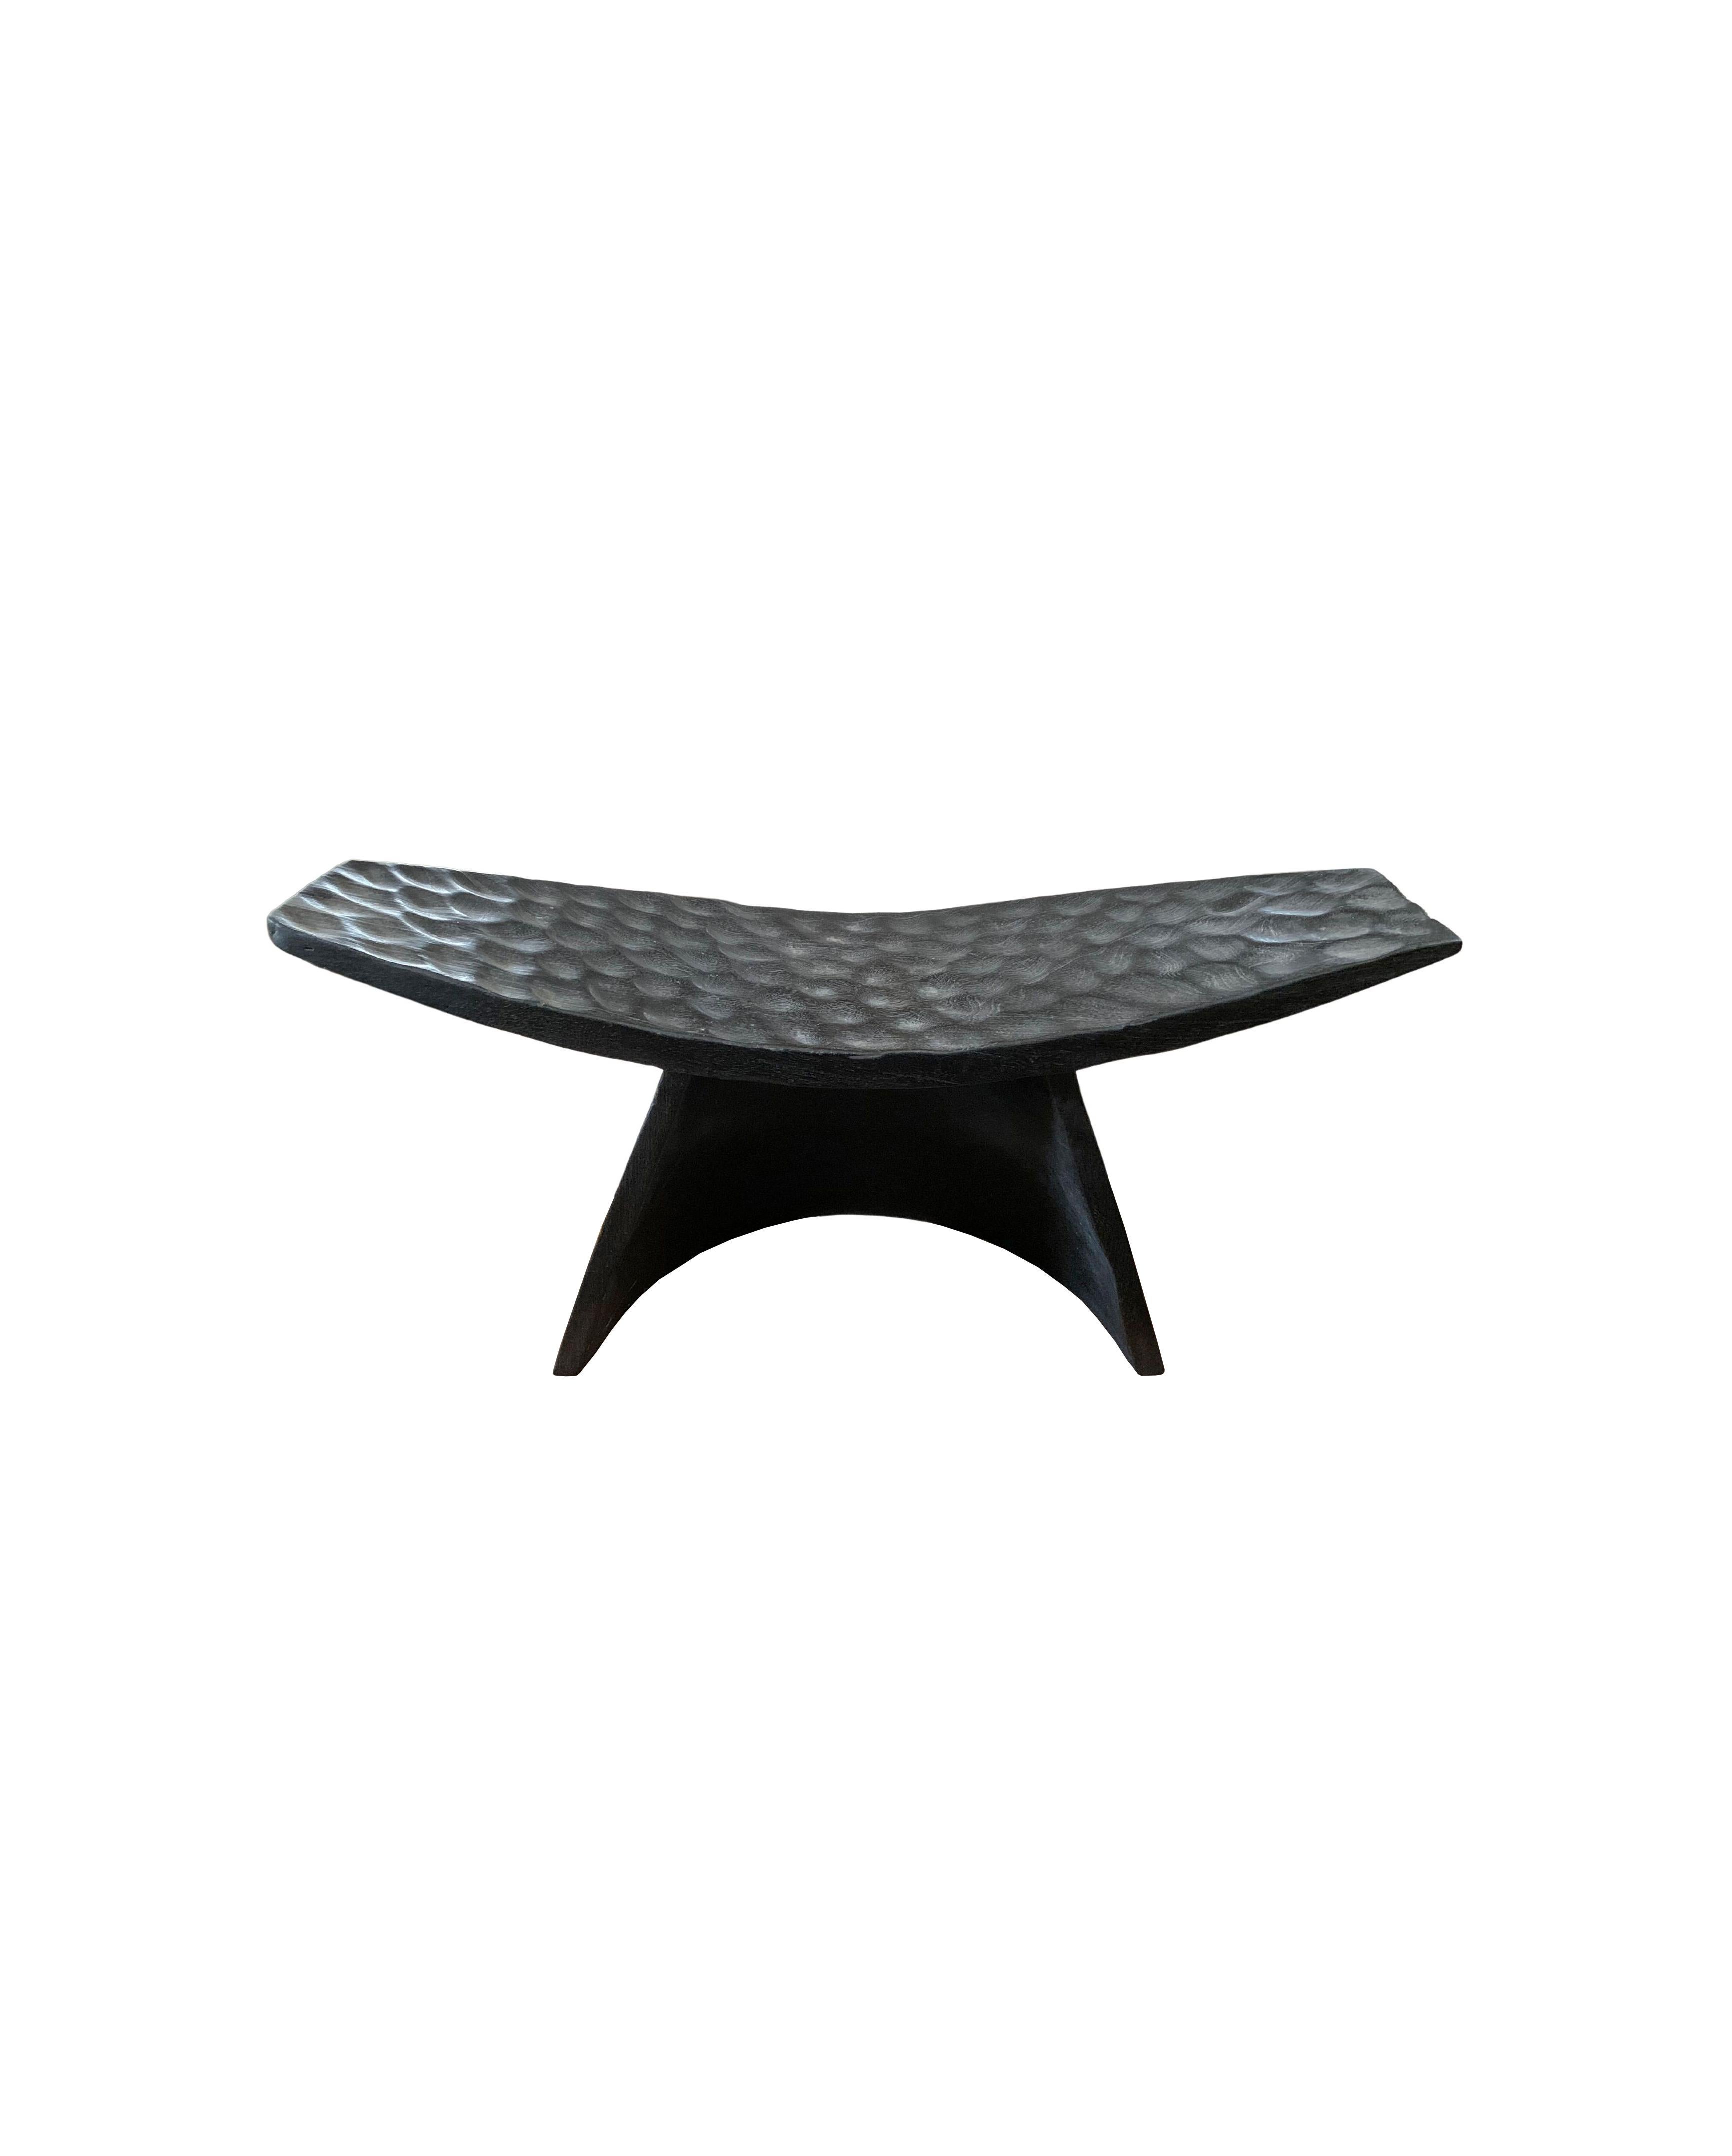 A wonderfully sculptural stool with a curved seat and hand hewn detailing. Its rich black pigment was achieved through burning the wood three times. The stool's neutral pigment and subtle wood texture makes it perfect for any space. A uniquely